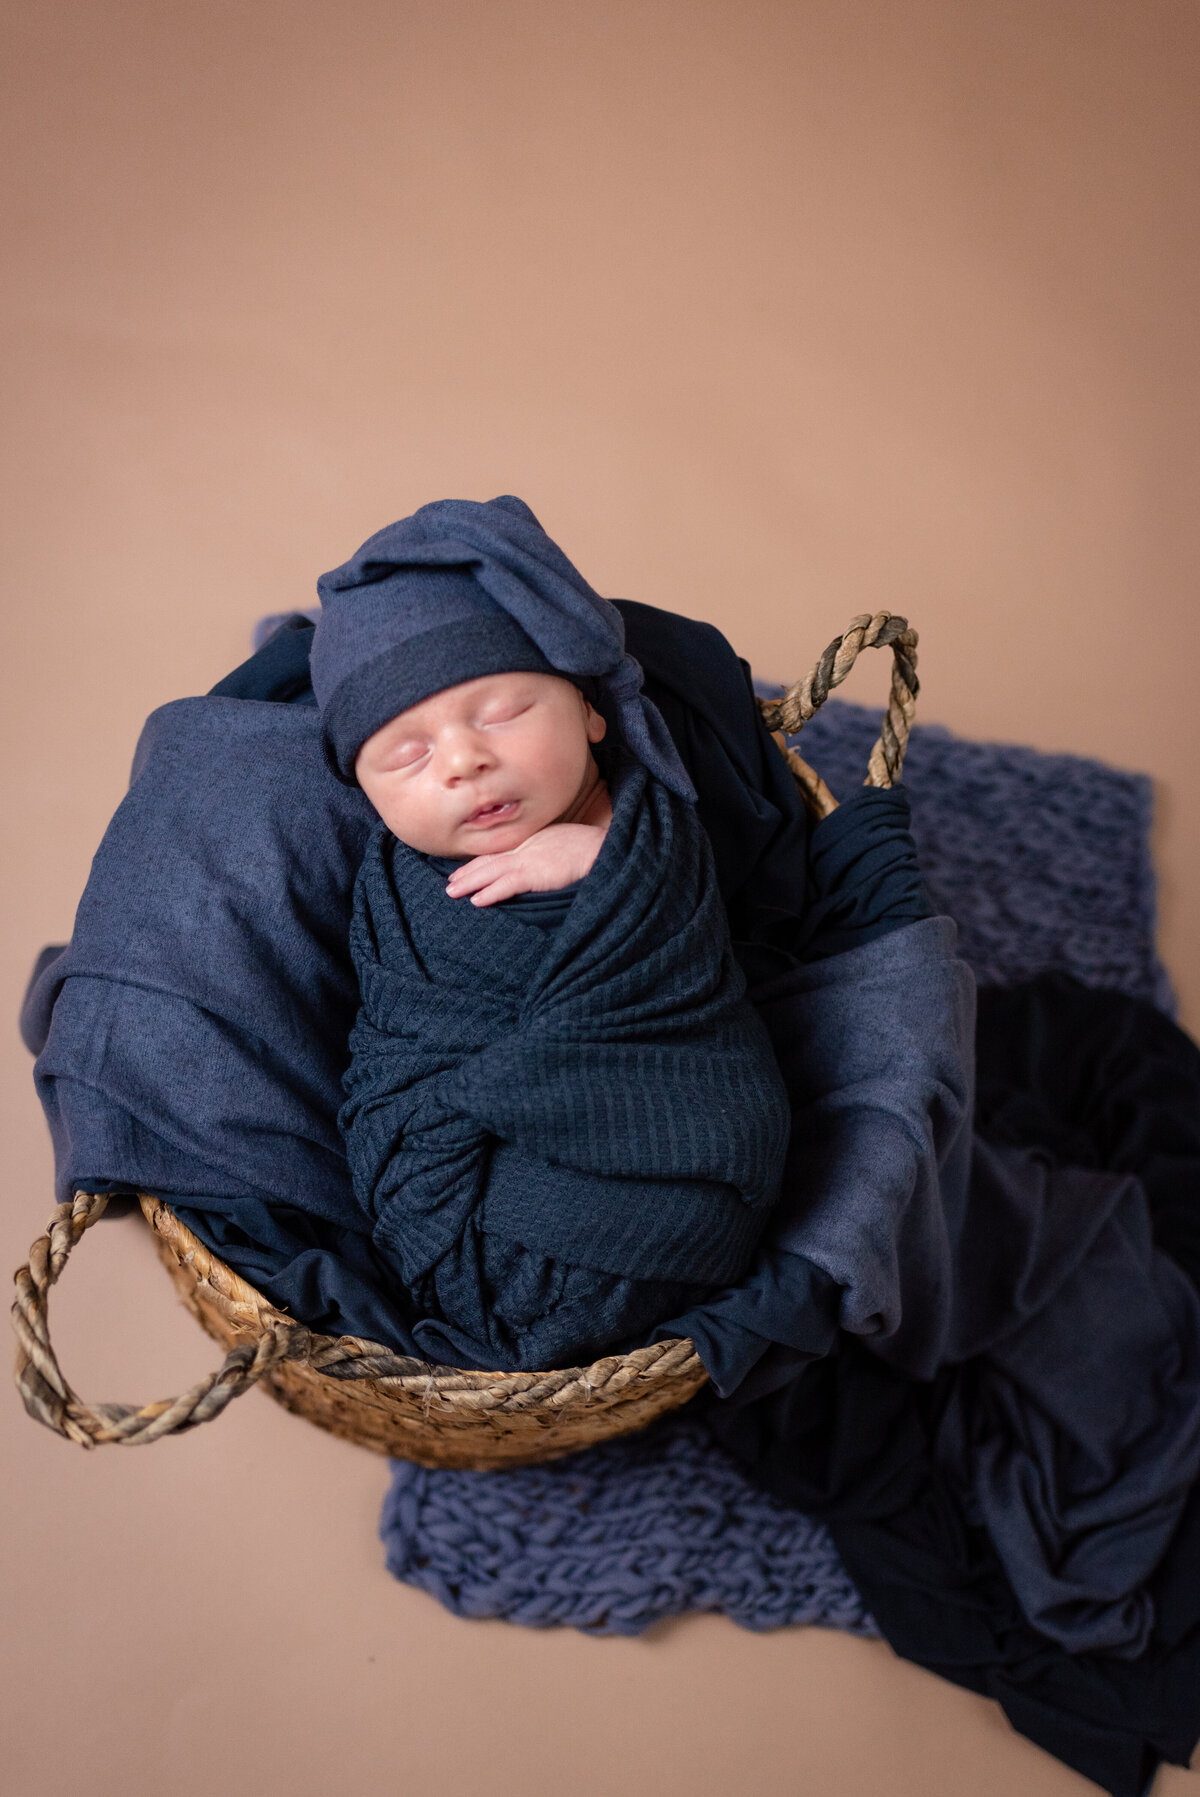 baby in basket and blues wrapped newborn bluffton indiana northeast IN fort wayne newbron photographer baby photography